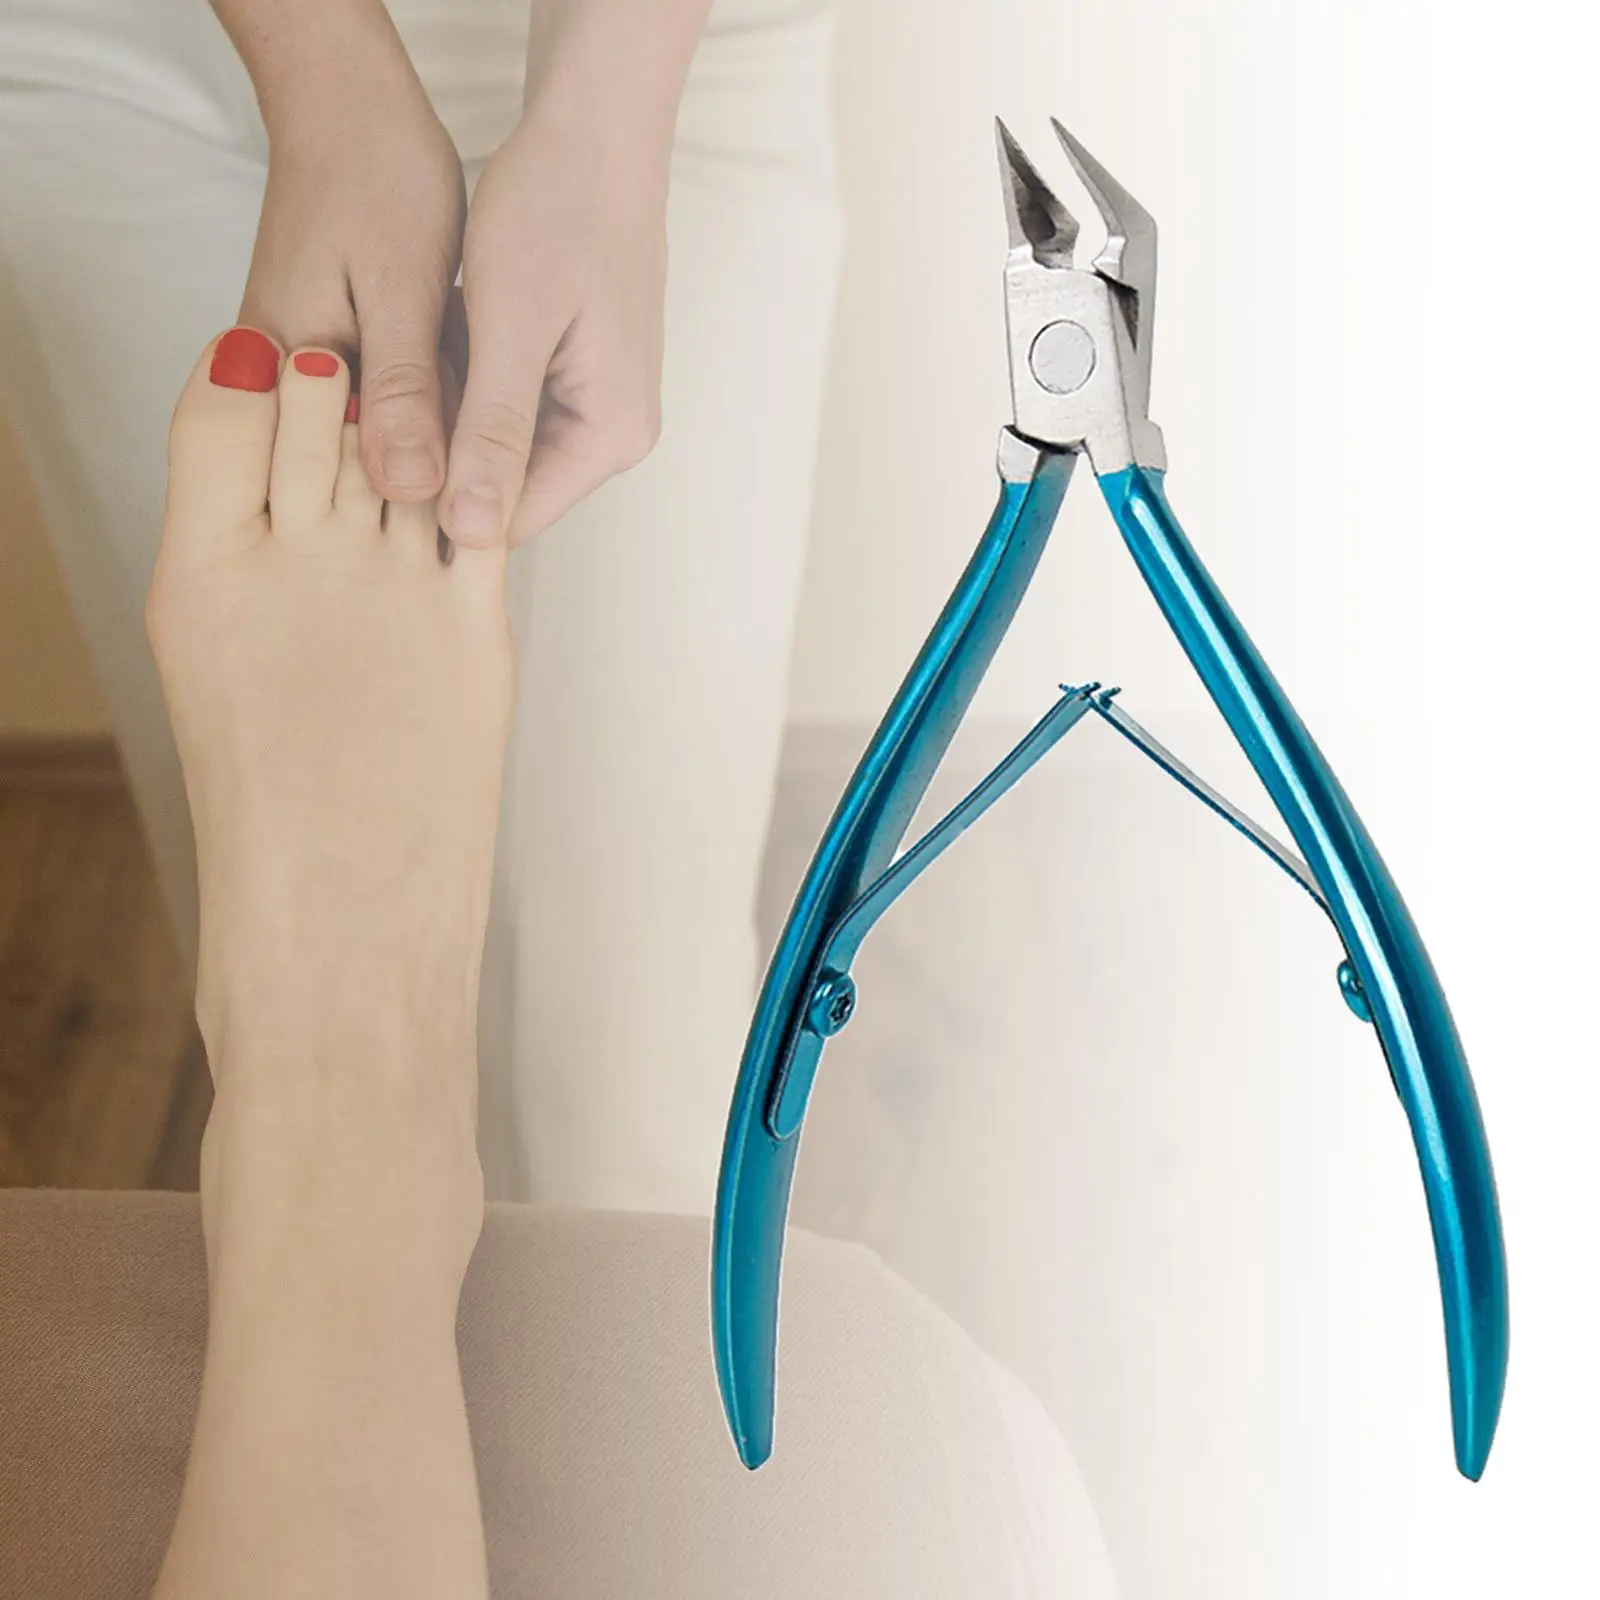 Stainless Steel Toenail clippers 120 Degree Curved Nonslip Handle Rustproof Sharp Pointed Tip Toenails Cutter for Calluses Home